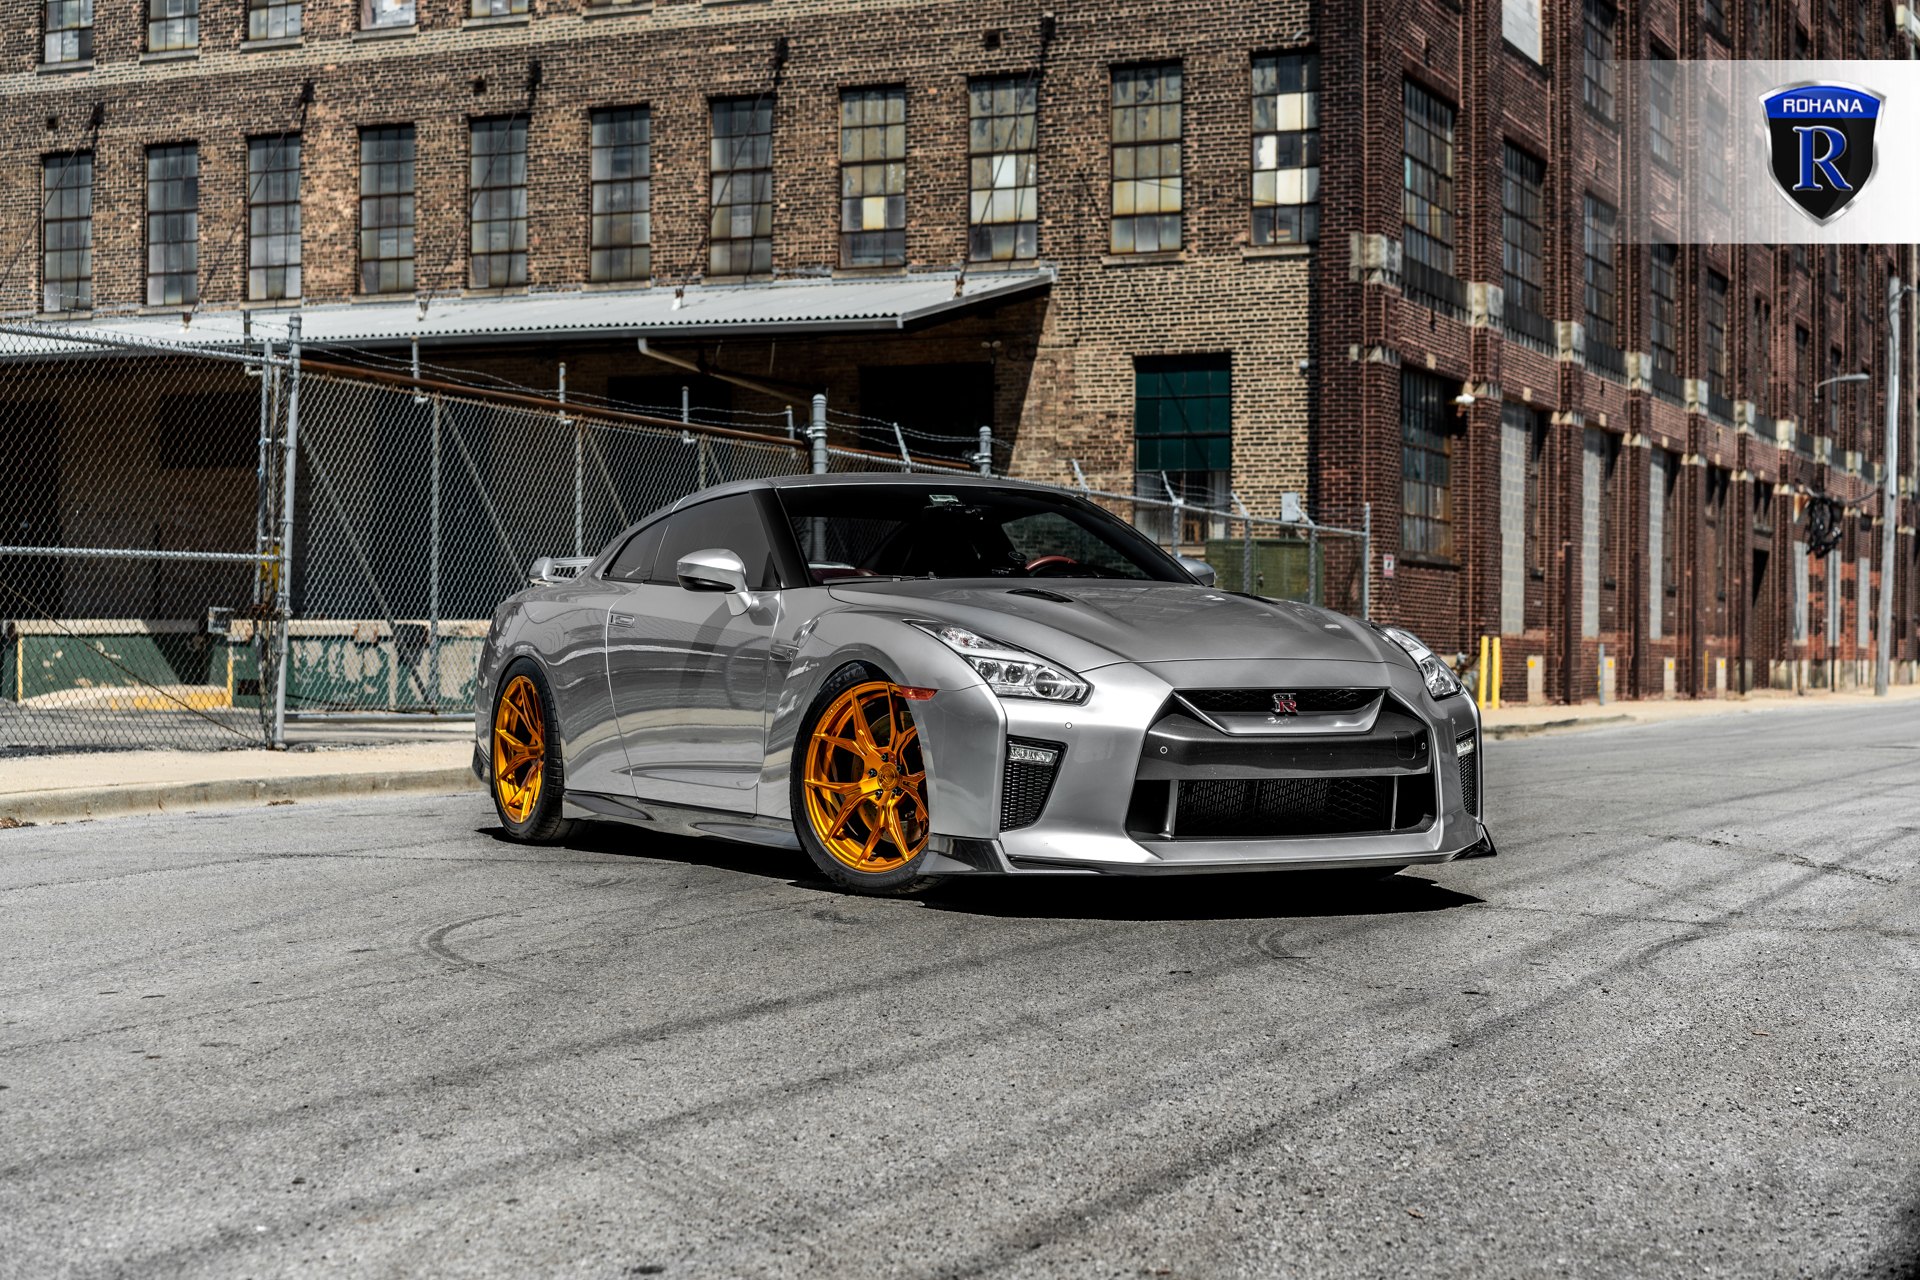 Silver Nissan GT-R with Crystal Clear Headlights - Photo by Rohana Wheels